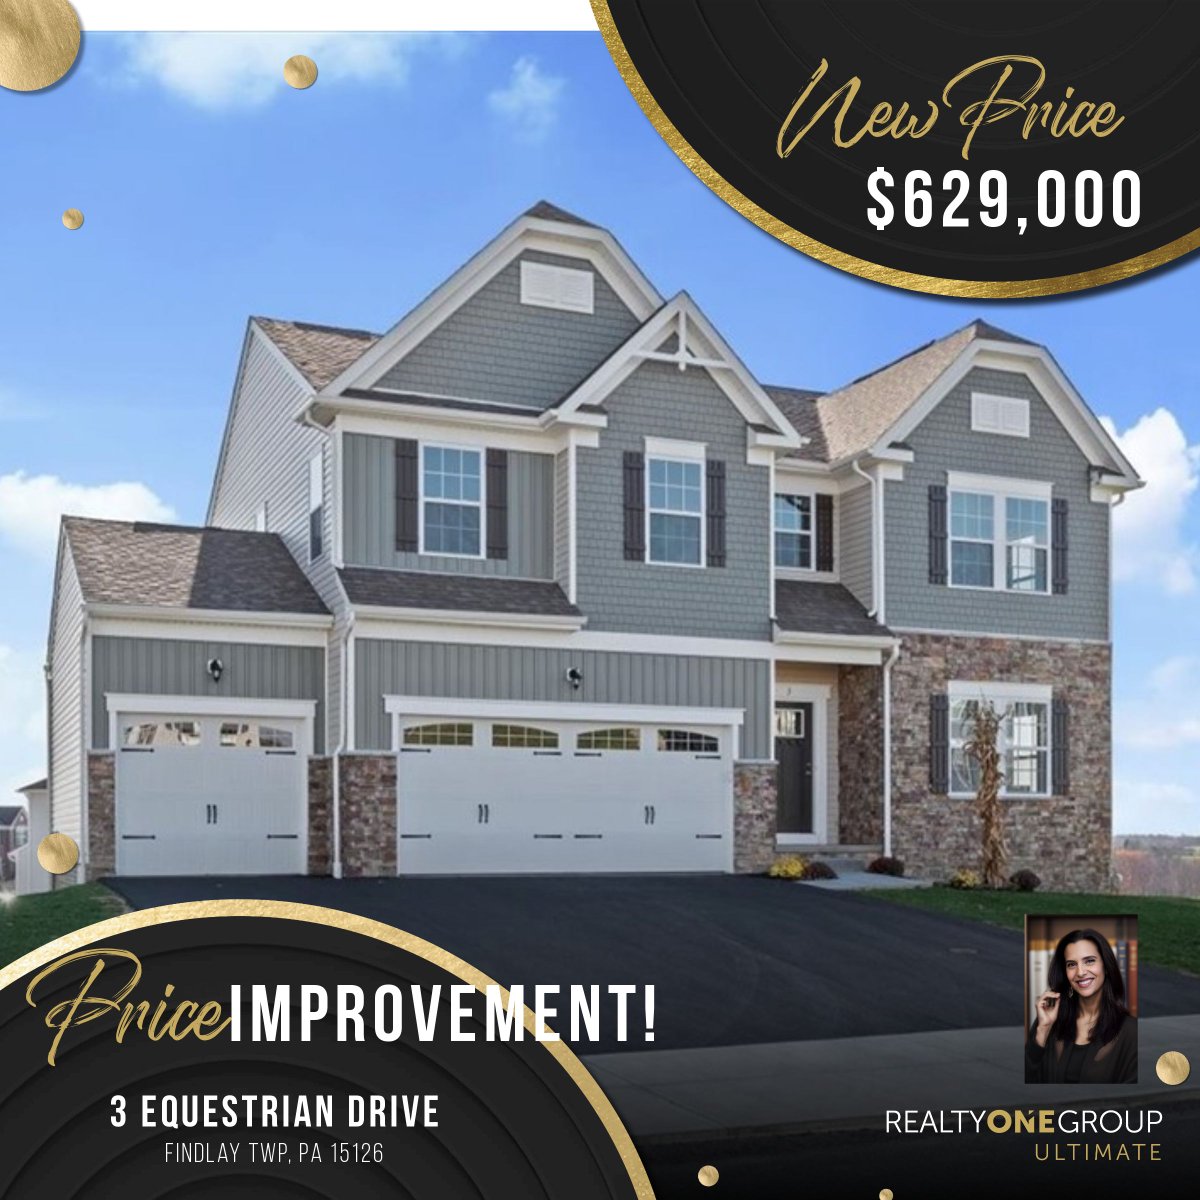 ✨ Exciting News! The price has just been reduced! 

For more details or to schedule a viewing, contact Realty ONE Group Ultimate at 724-201-0514. Your dream home might be just a call away! 

🏠🔑 #ReducedPrice #RealEstateOpportunity #RealtyONEGroupUltimate 🌈💼